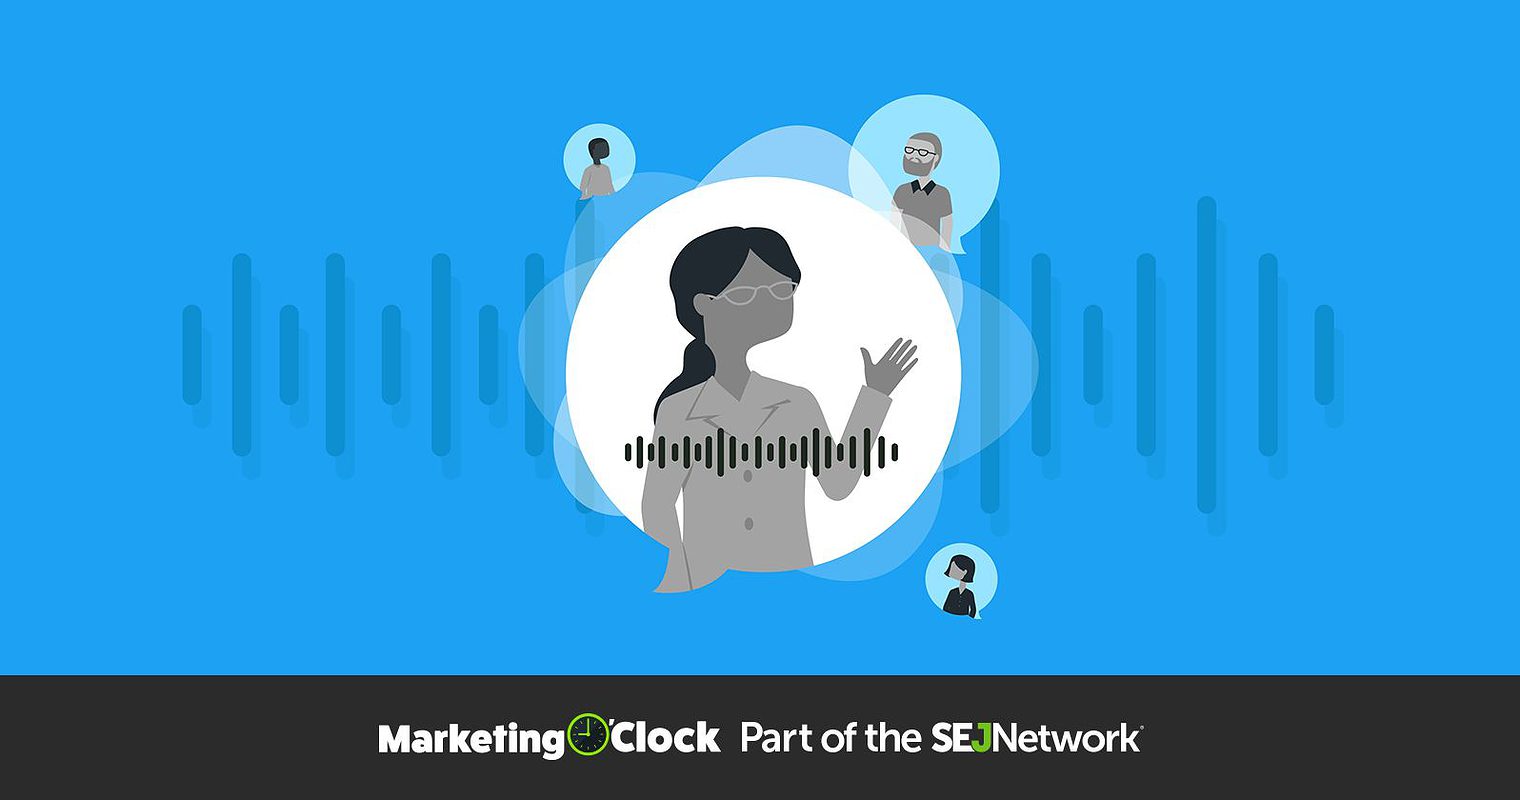 Voice Tweets & This Week’s Digital Marketing News [PODCAST]